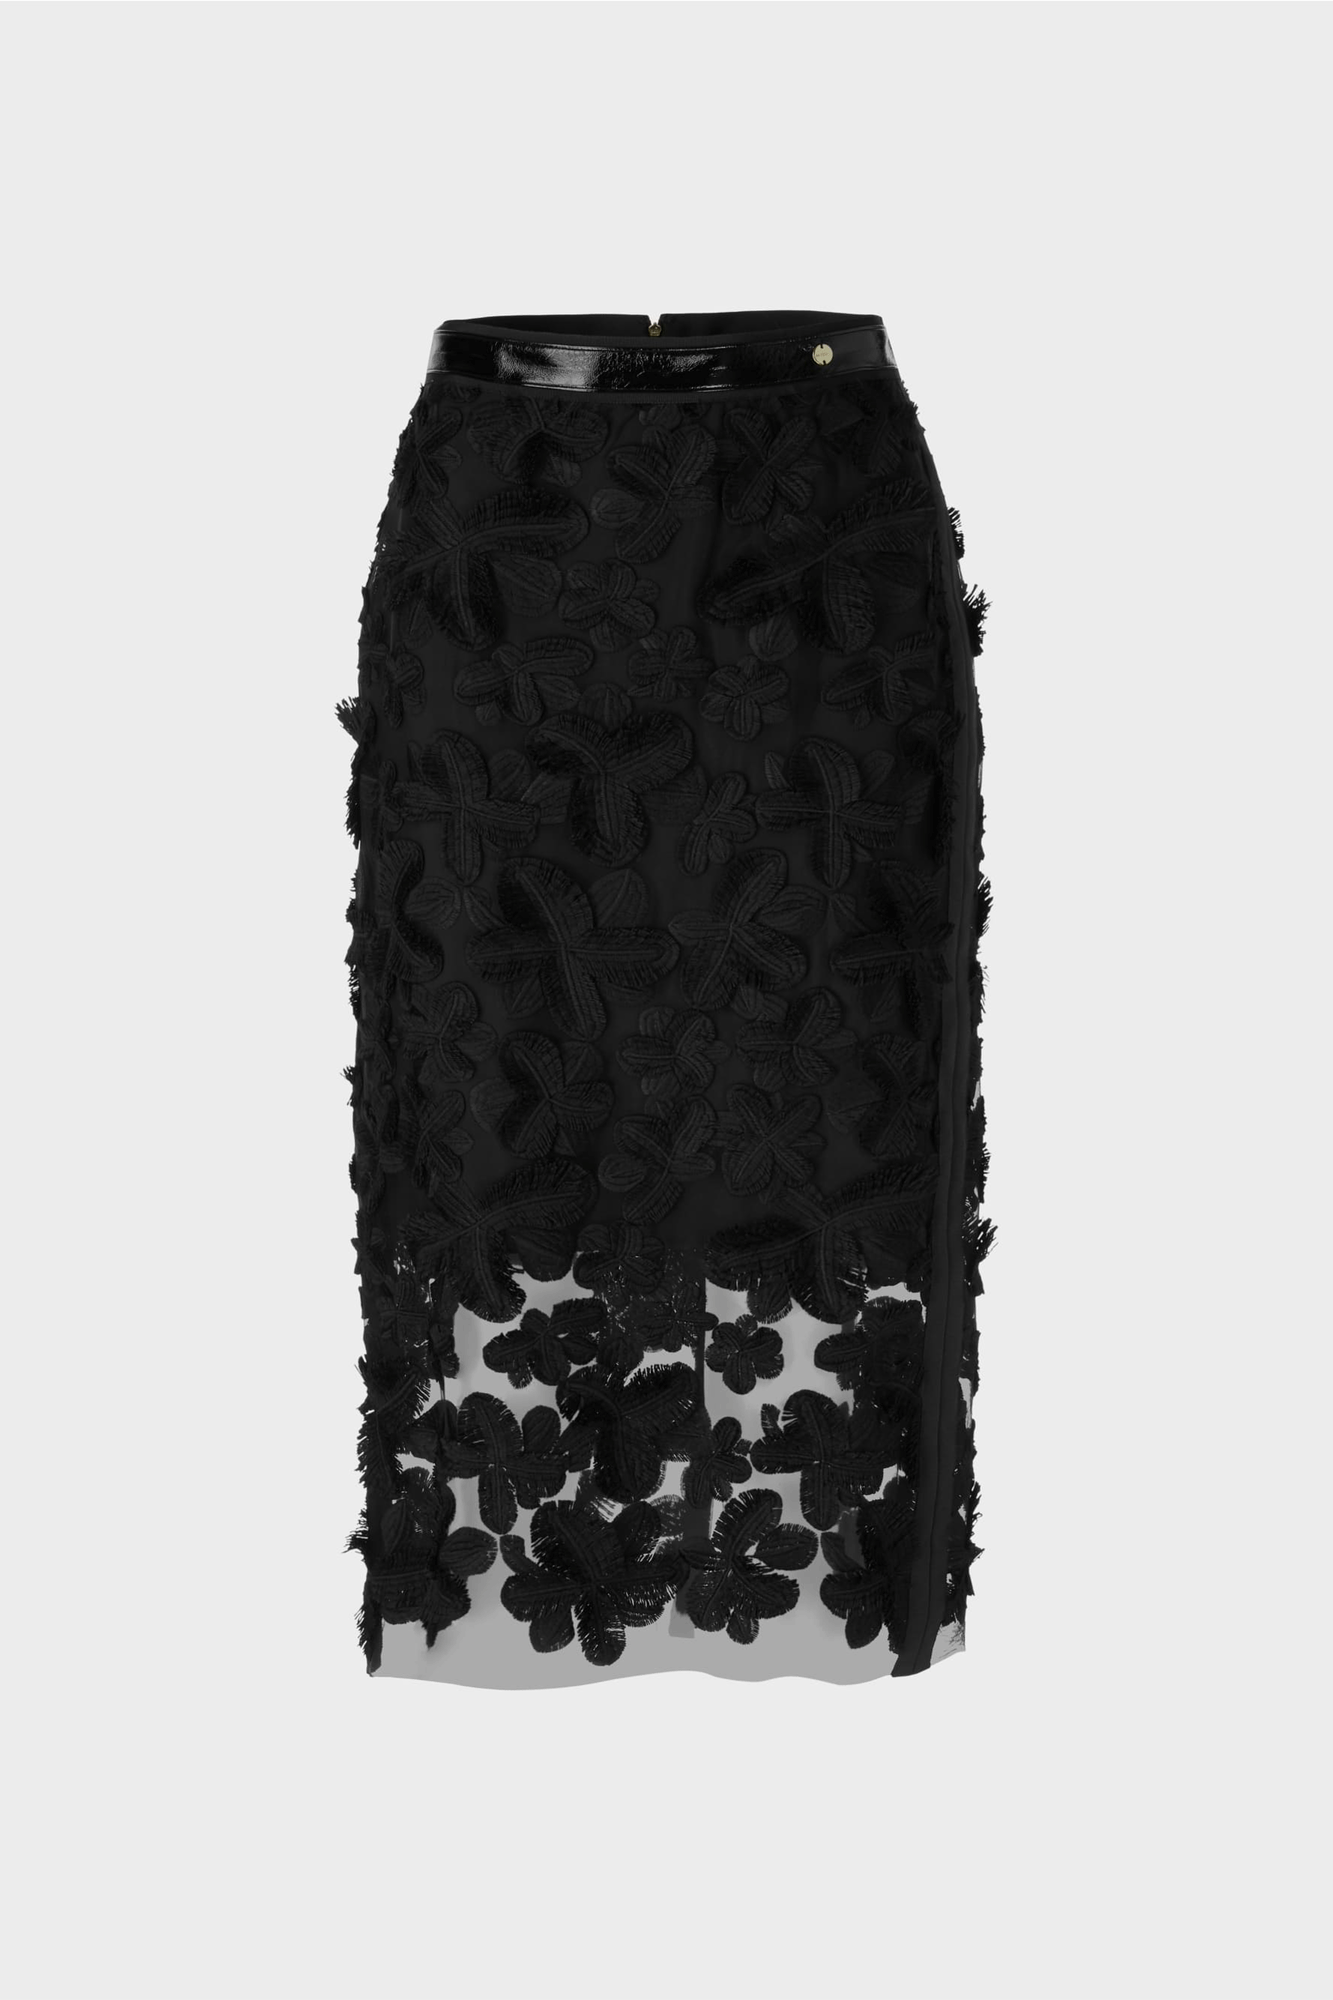 This stunning Contrast Extreme Midi Skirt from Marc Cain is crafted from a combination of tulle lace and translucent fabric. With a figure-hugging silhouette, it features an elegant floral design, back slit, and a concealed zip closure. These details combine to create a sophisticated and feminine look.